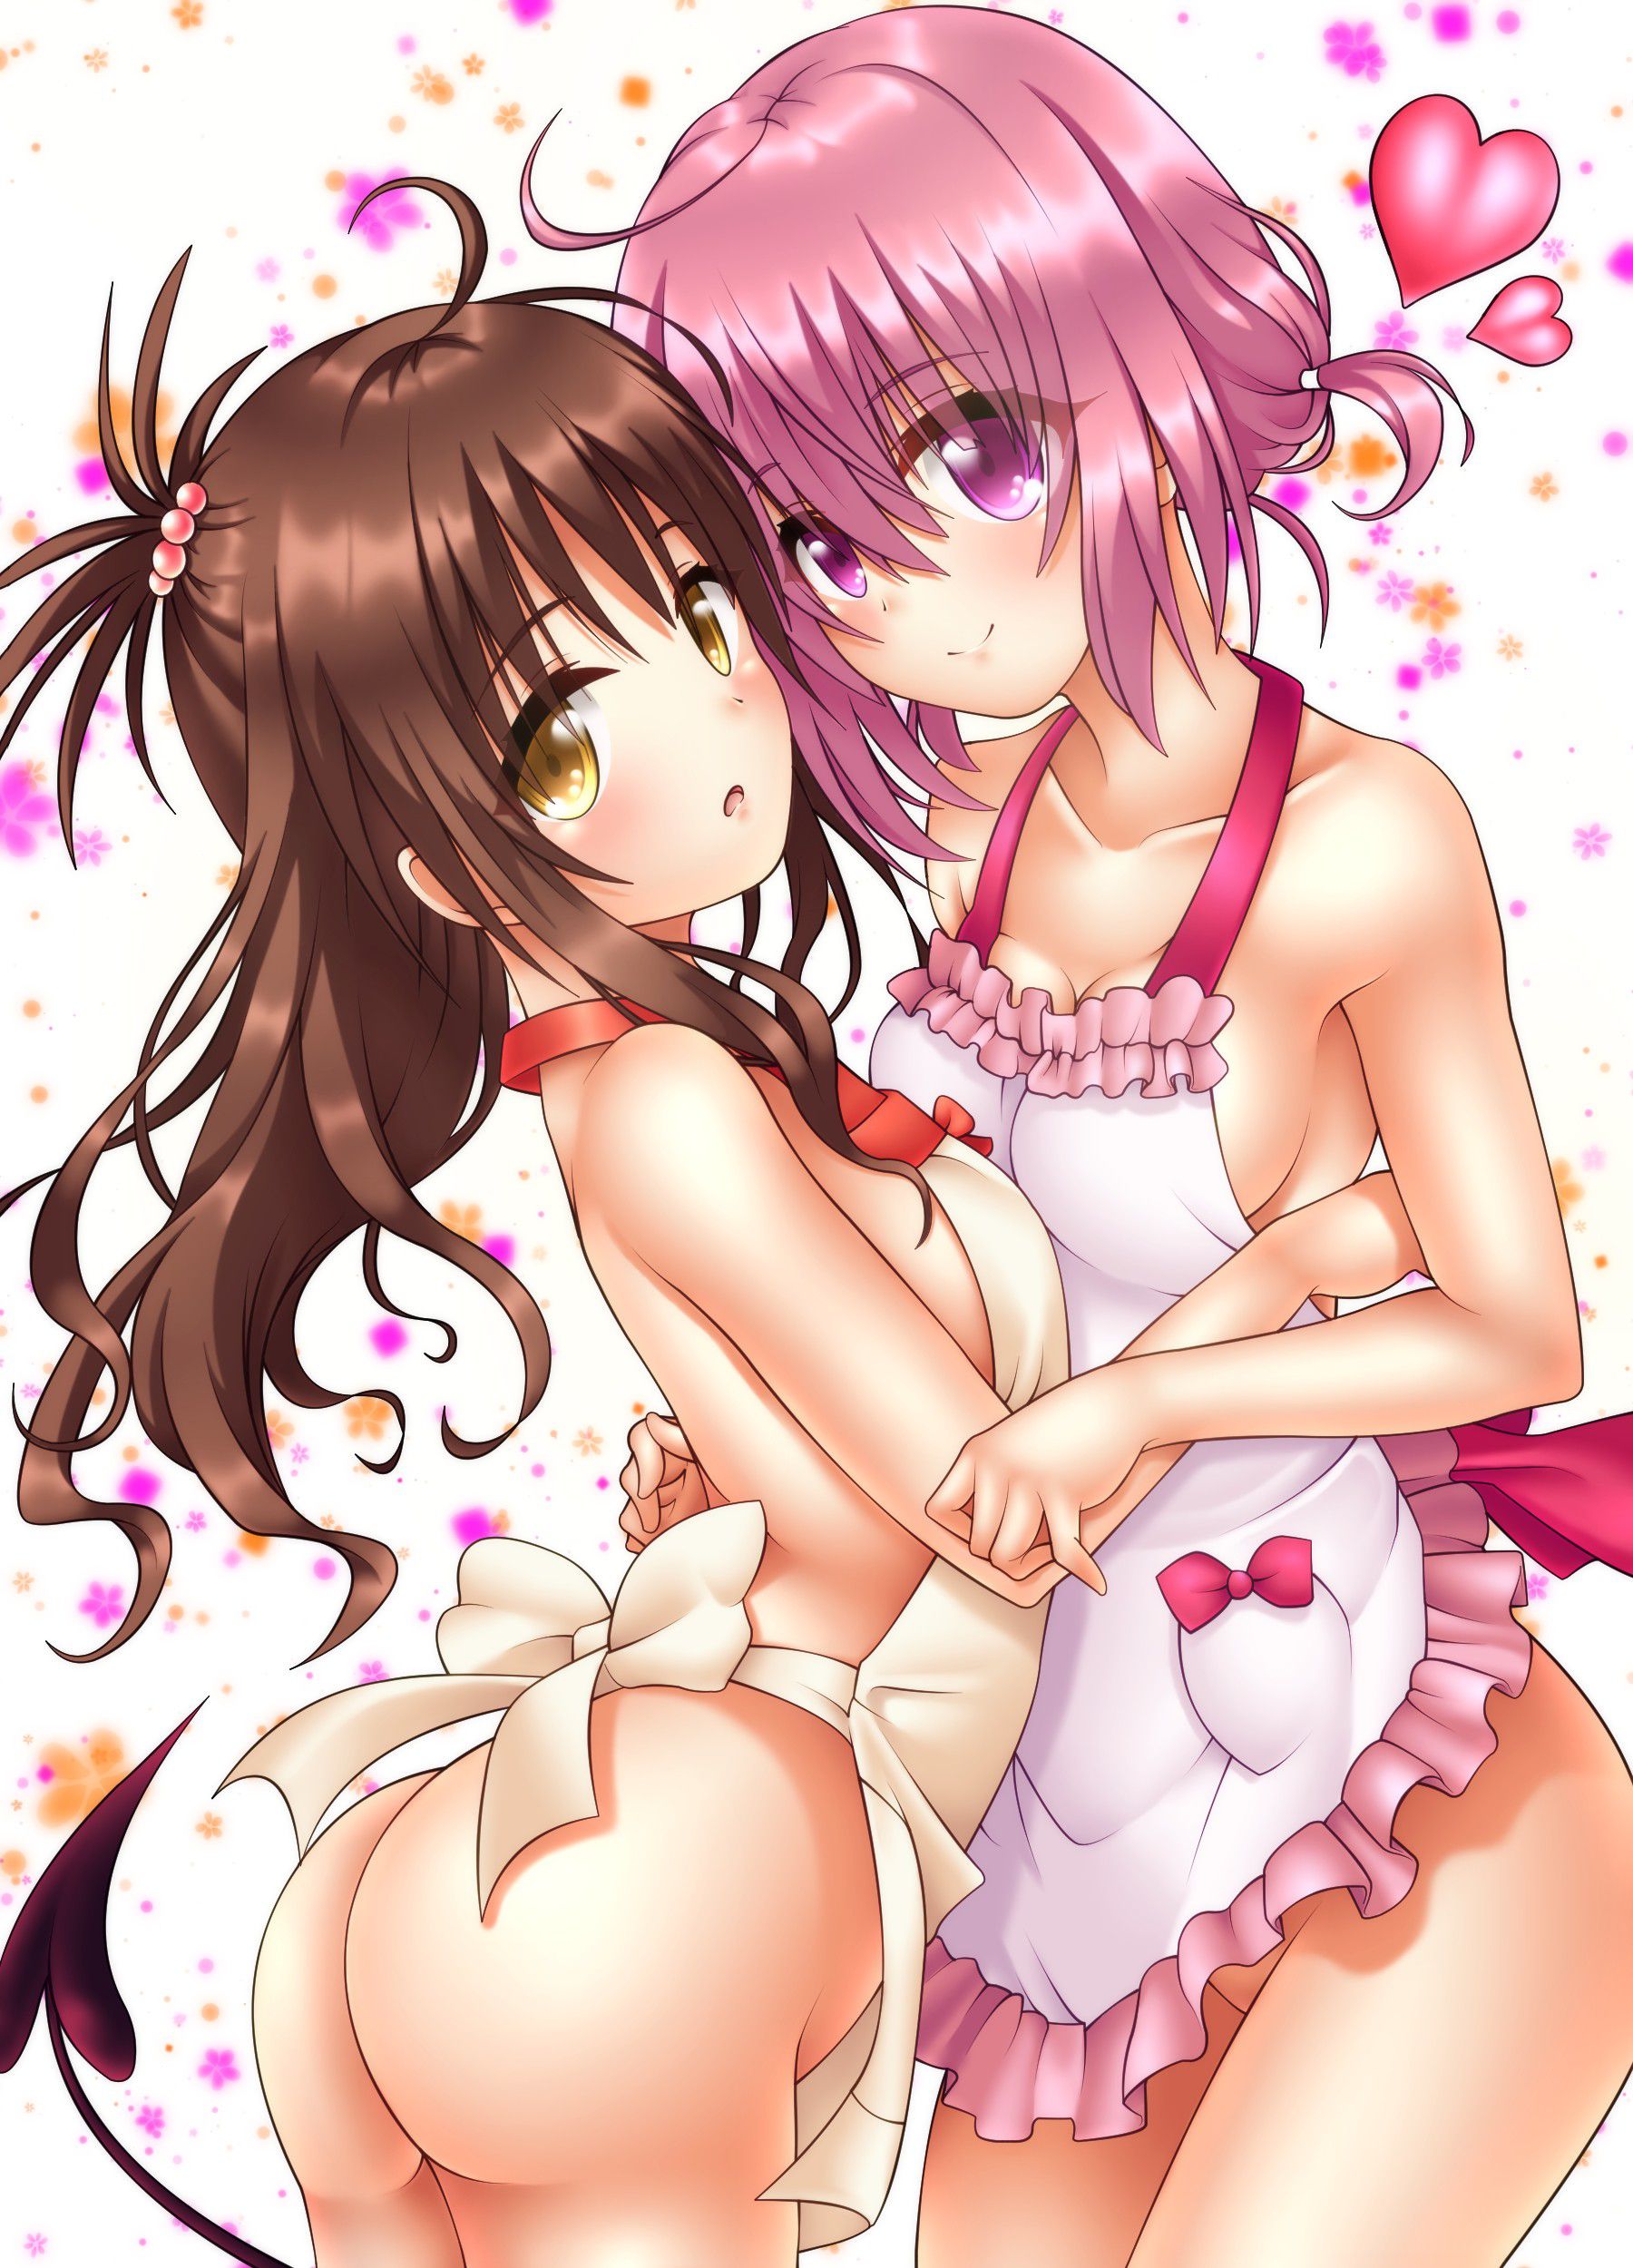 【Secondary】Erotic image of the girl in the naked apron that will be erected immediately when you get home 2